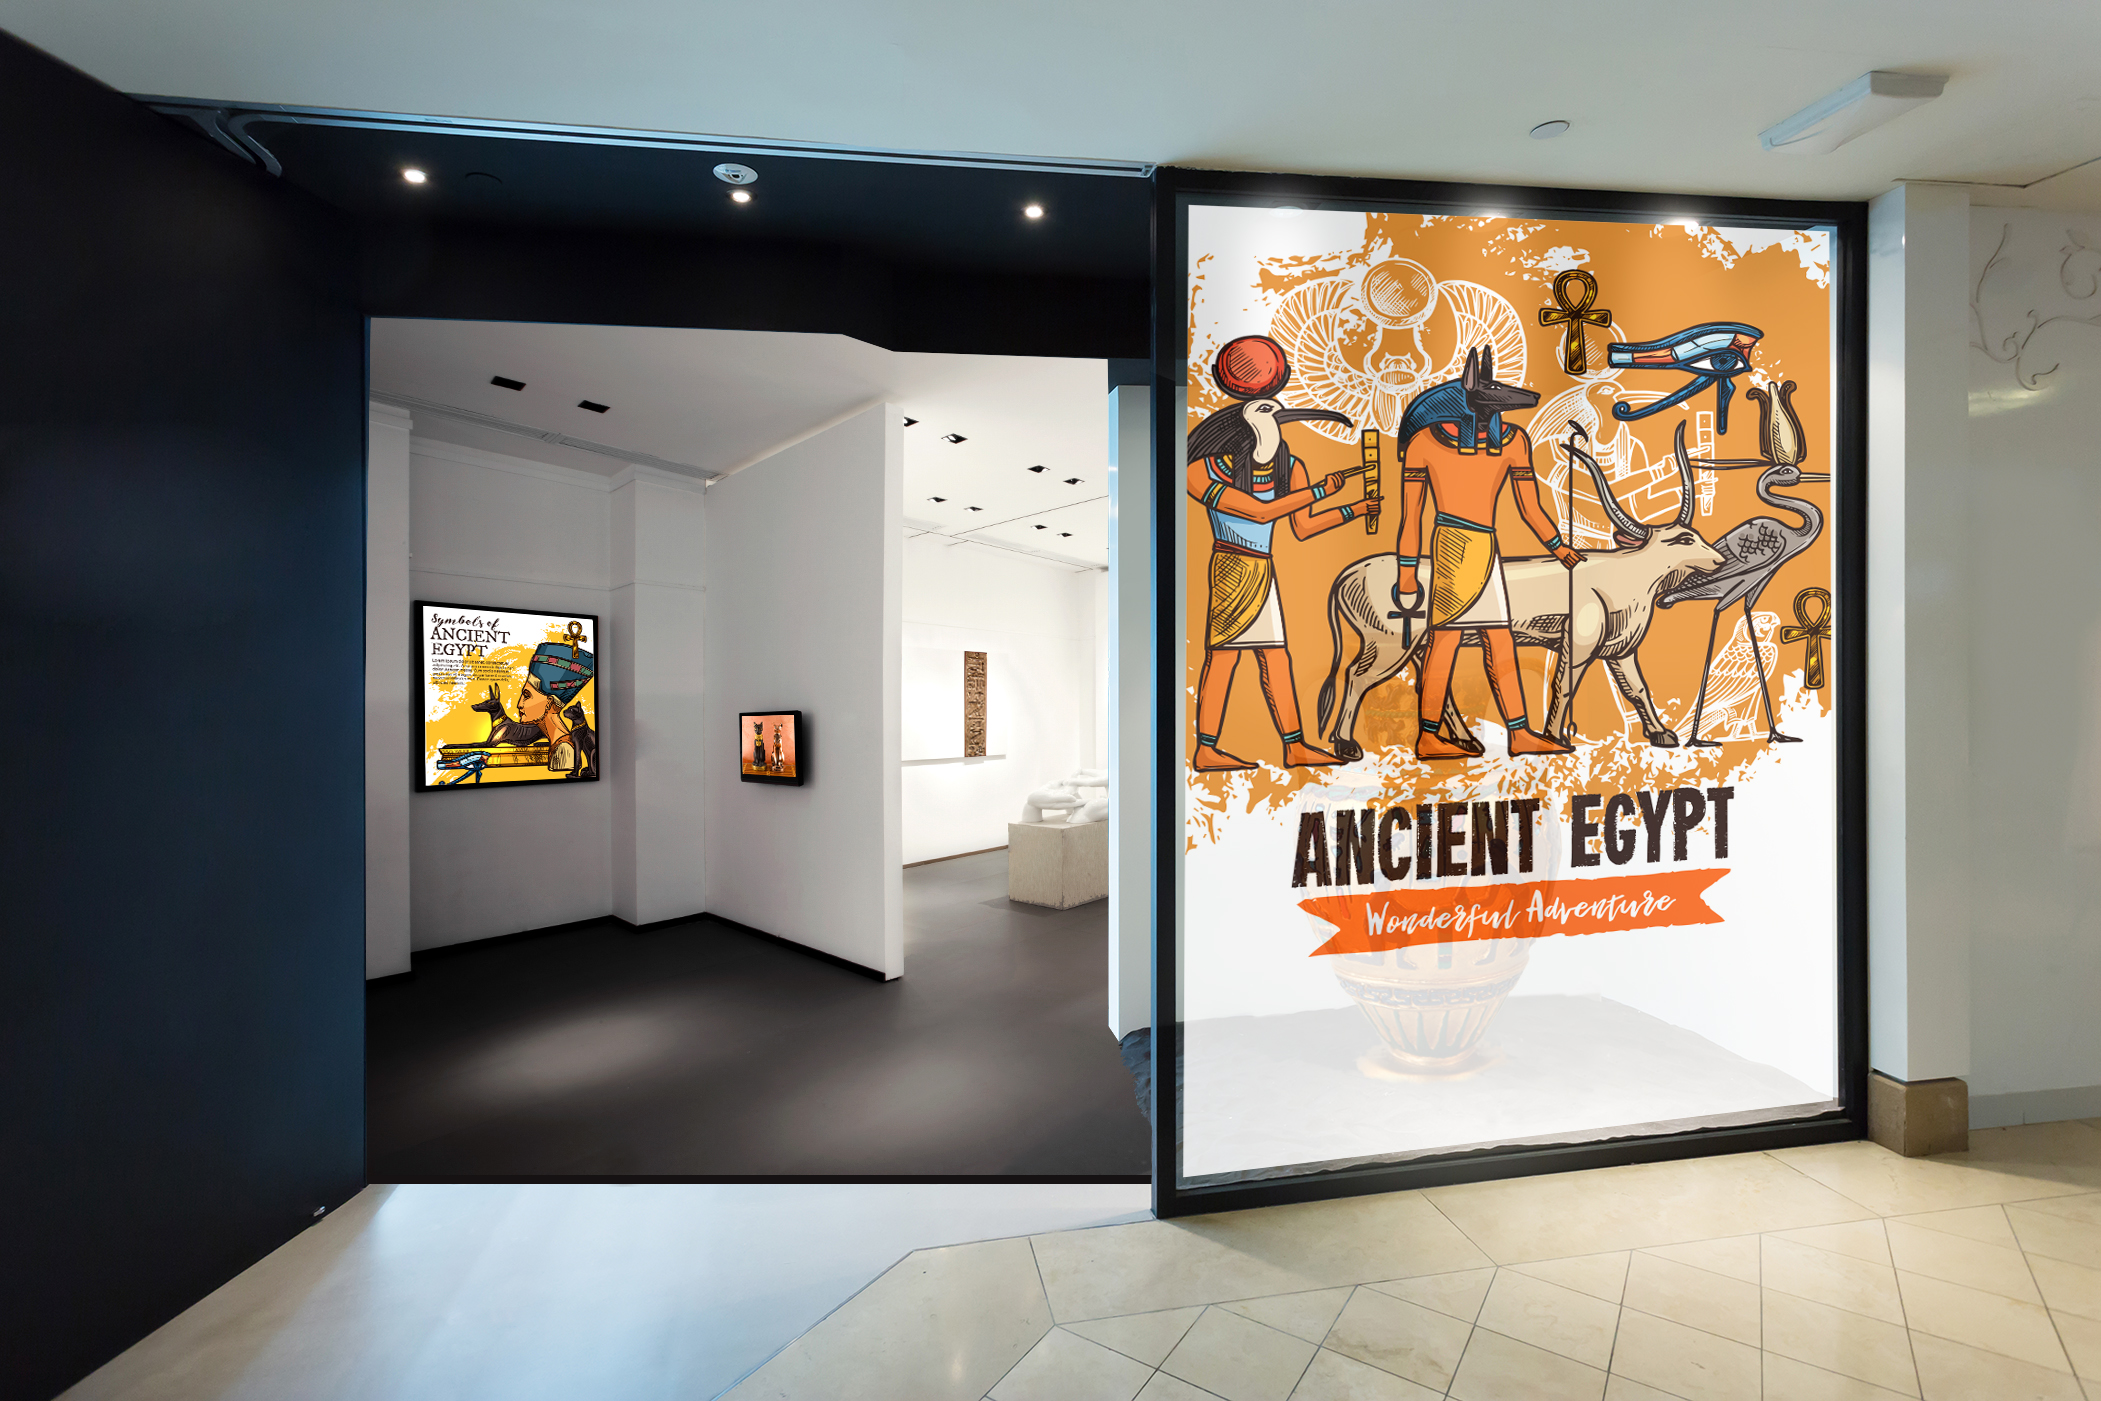 ActiveScene Displayed in a Museum